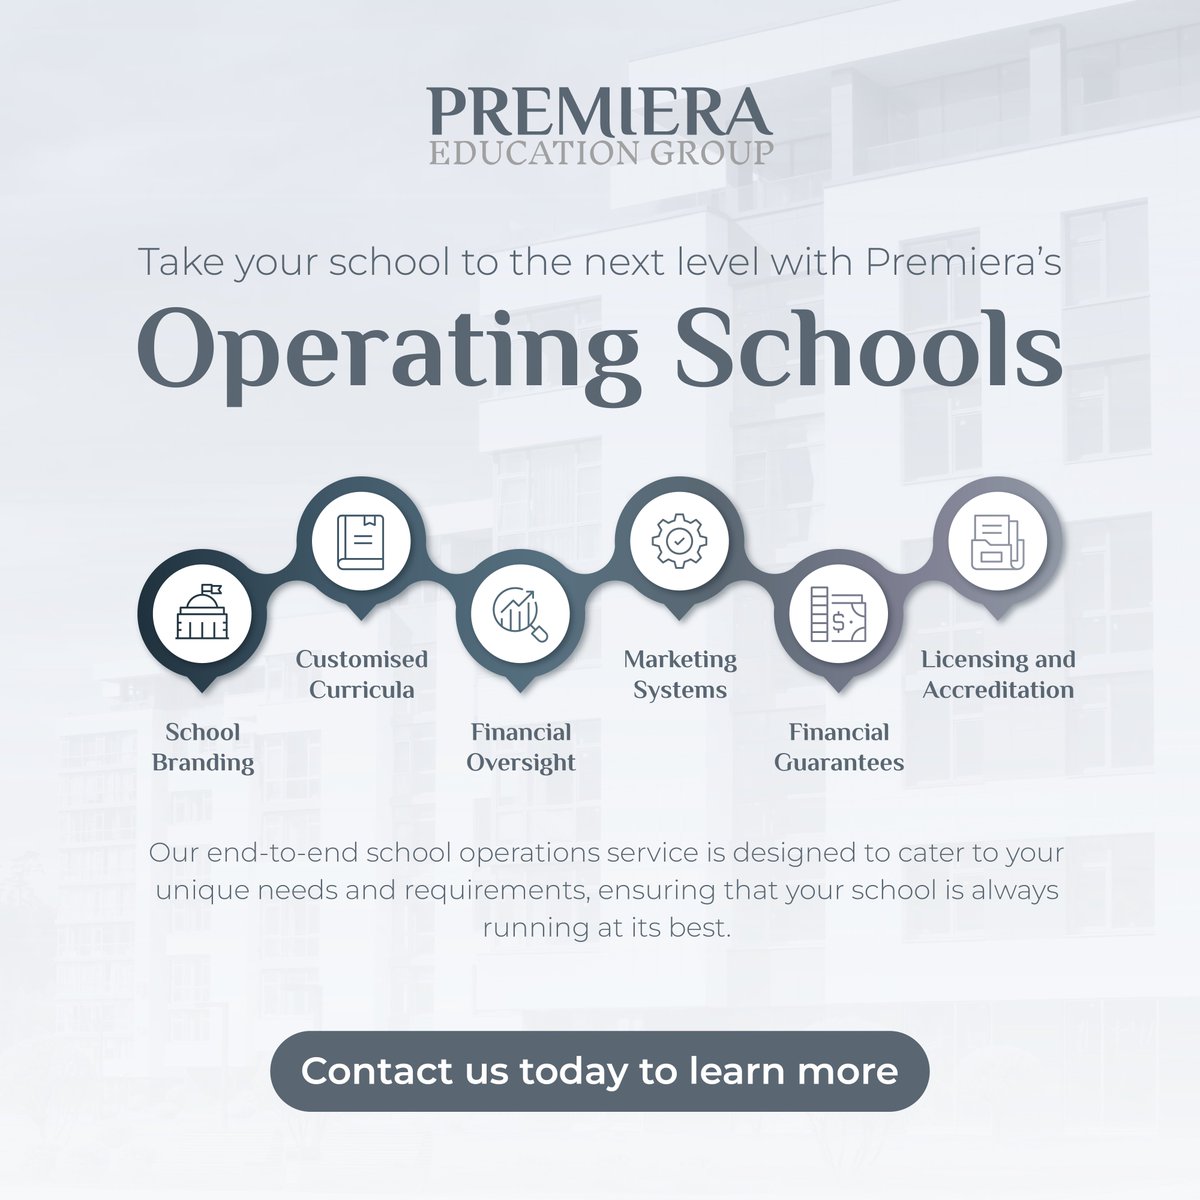 Premiera is dedicated to maintaining the utmost standards in school management and operations. Backed by our seasoned team, we offer systems and policies tailored to suit the needs of any new school partnering with us.

From school branding and tailored curricula to meticulous…